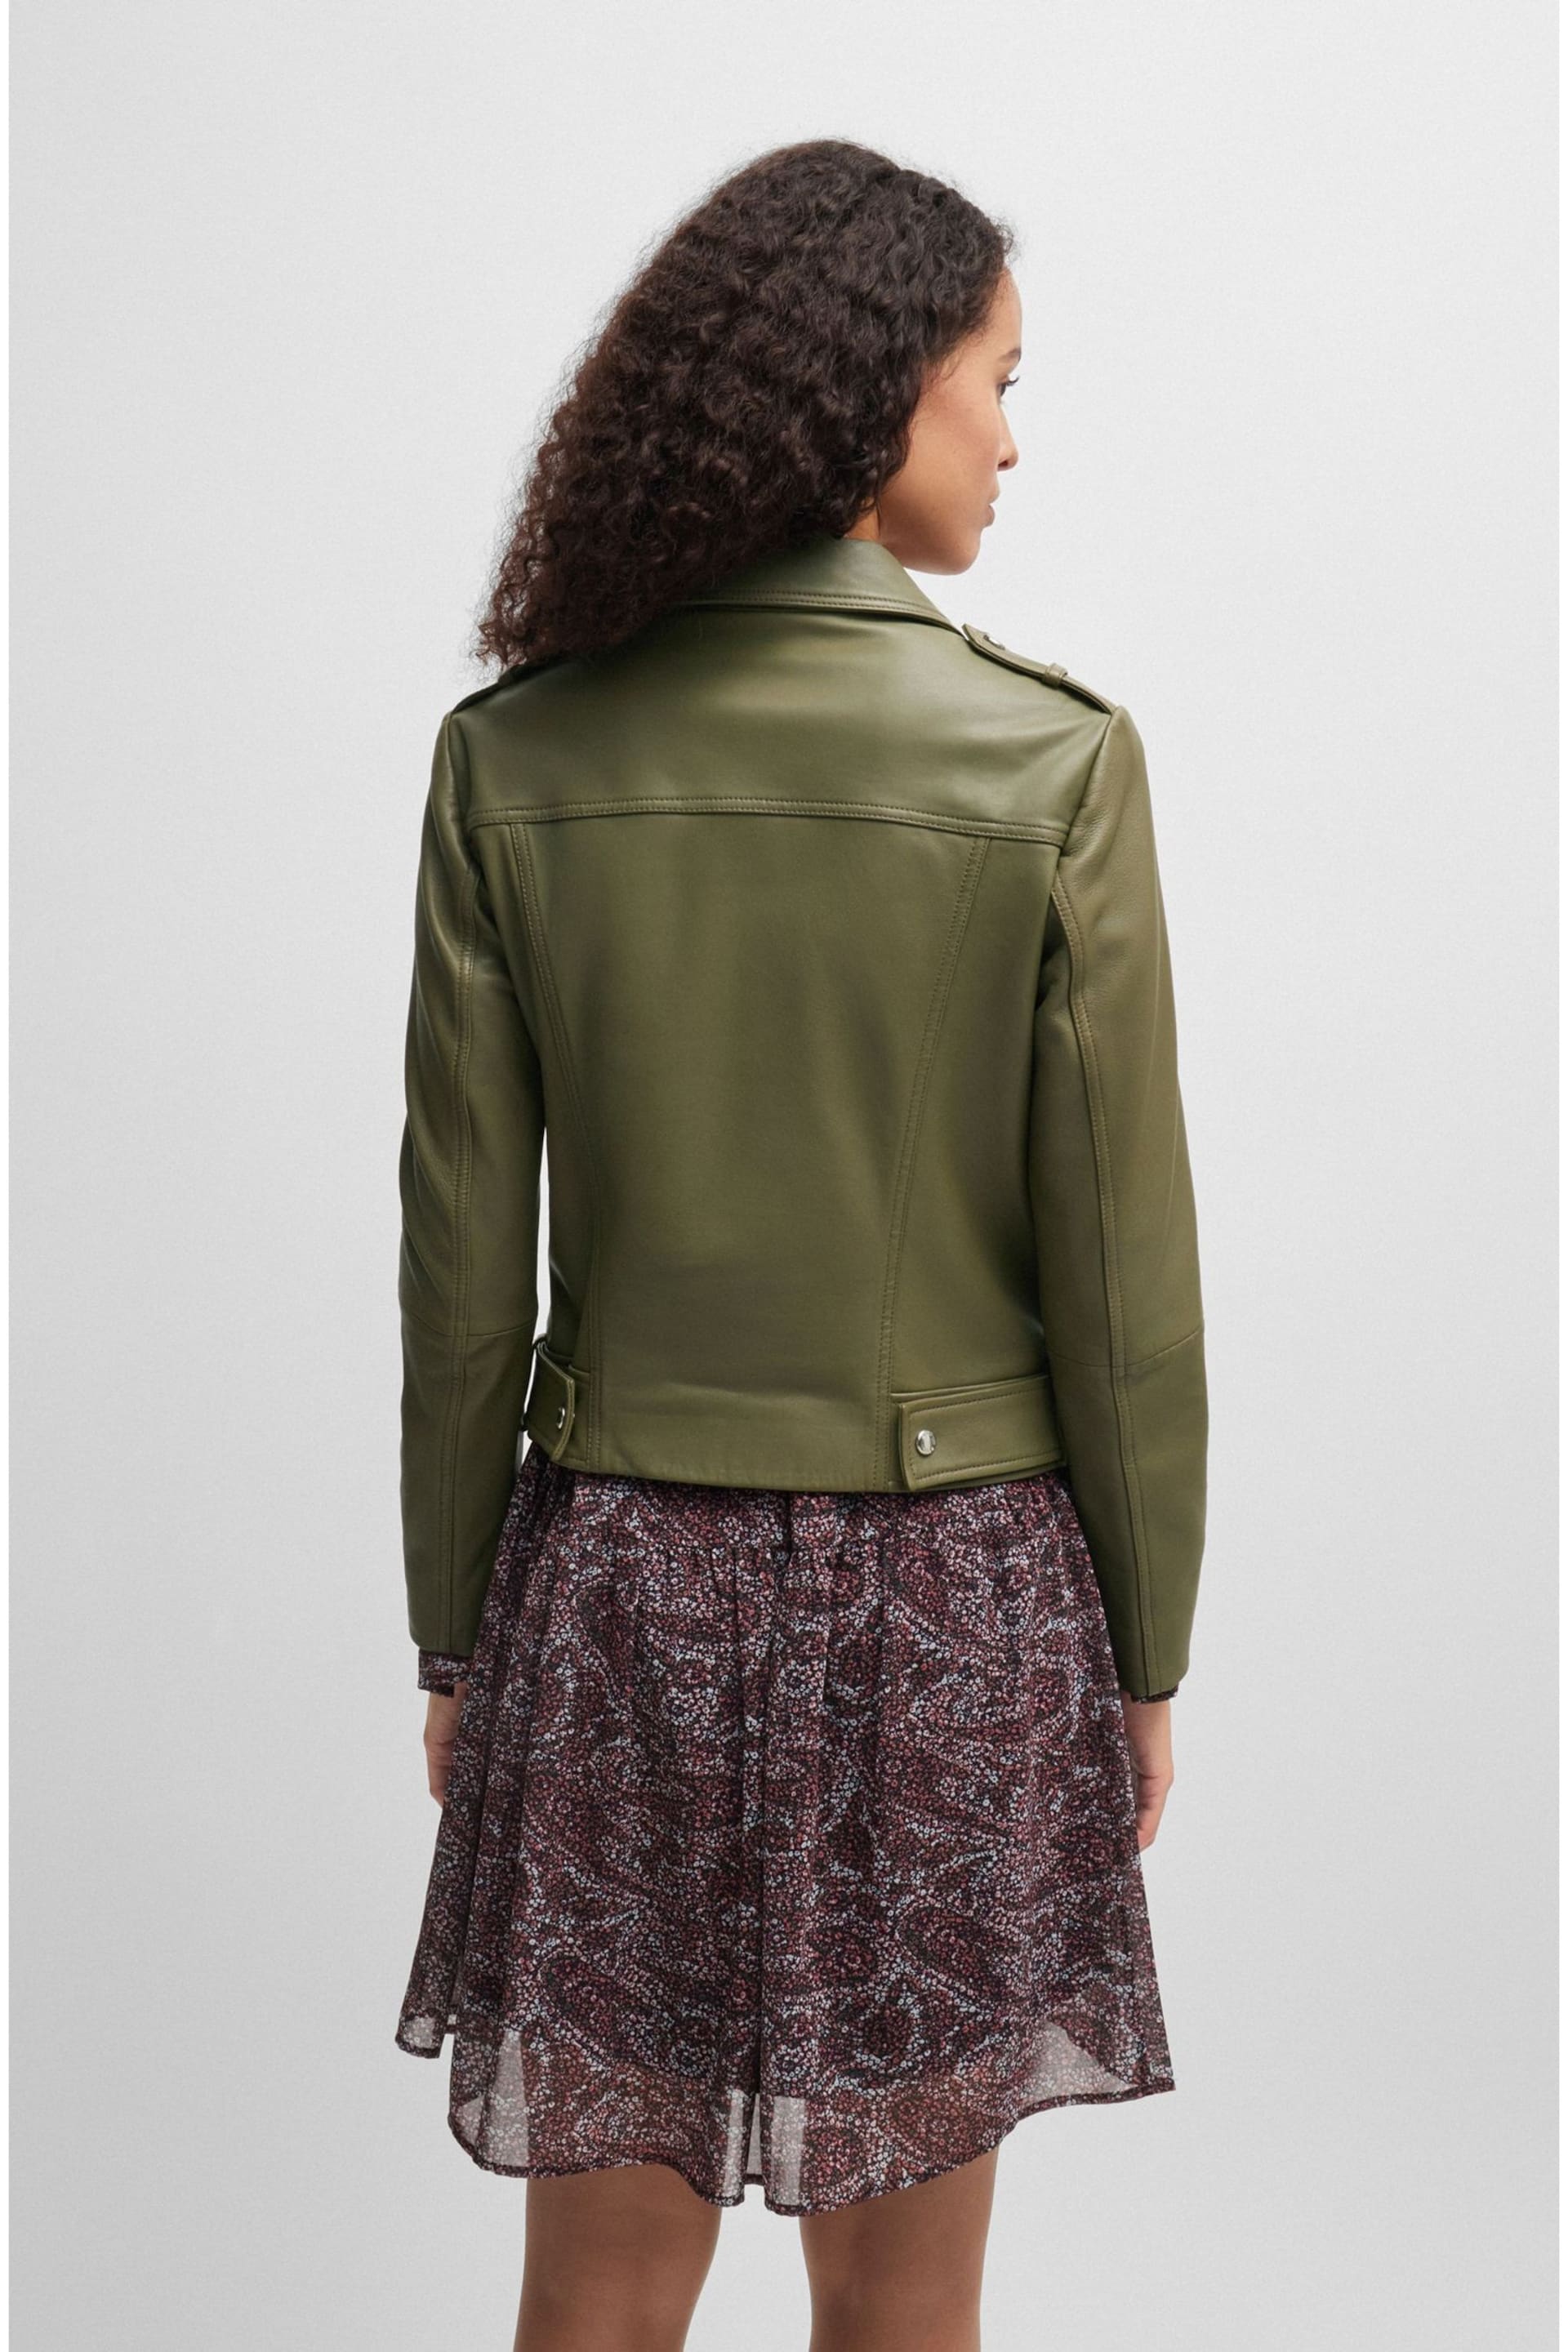 BOSS Green Buckled-Belt Jacket In Nappa Leather - Image 2 of 6